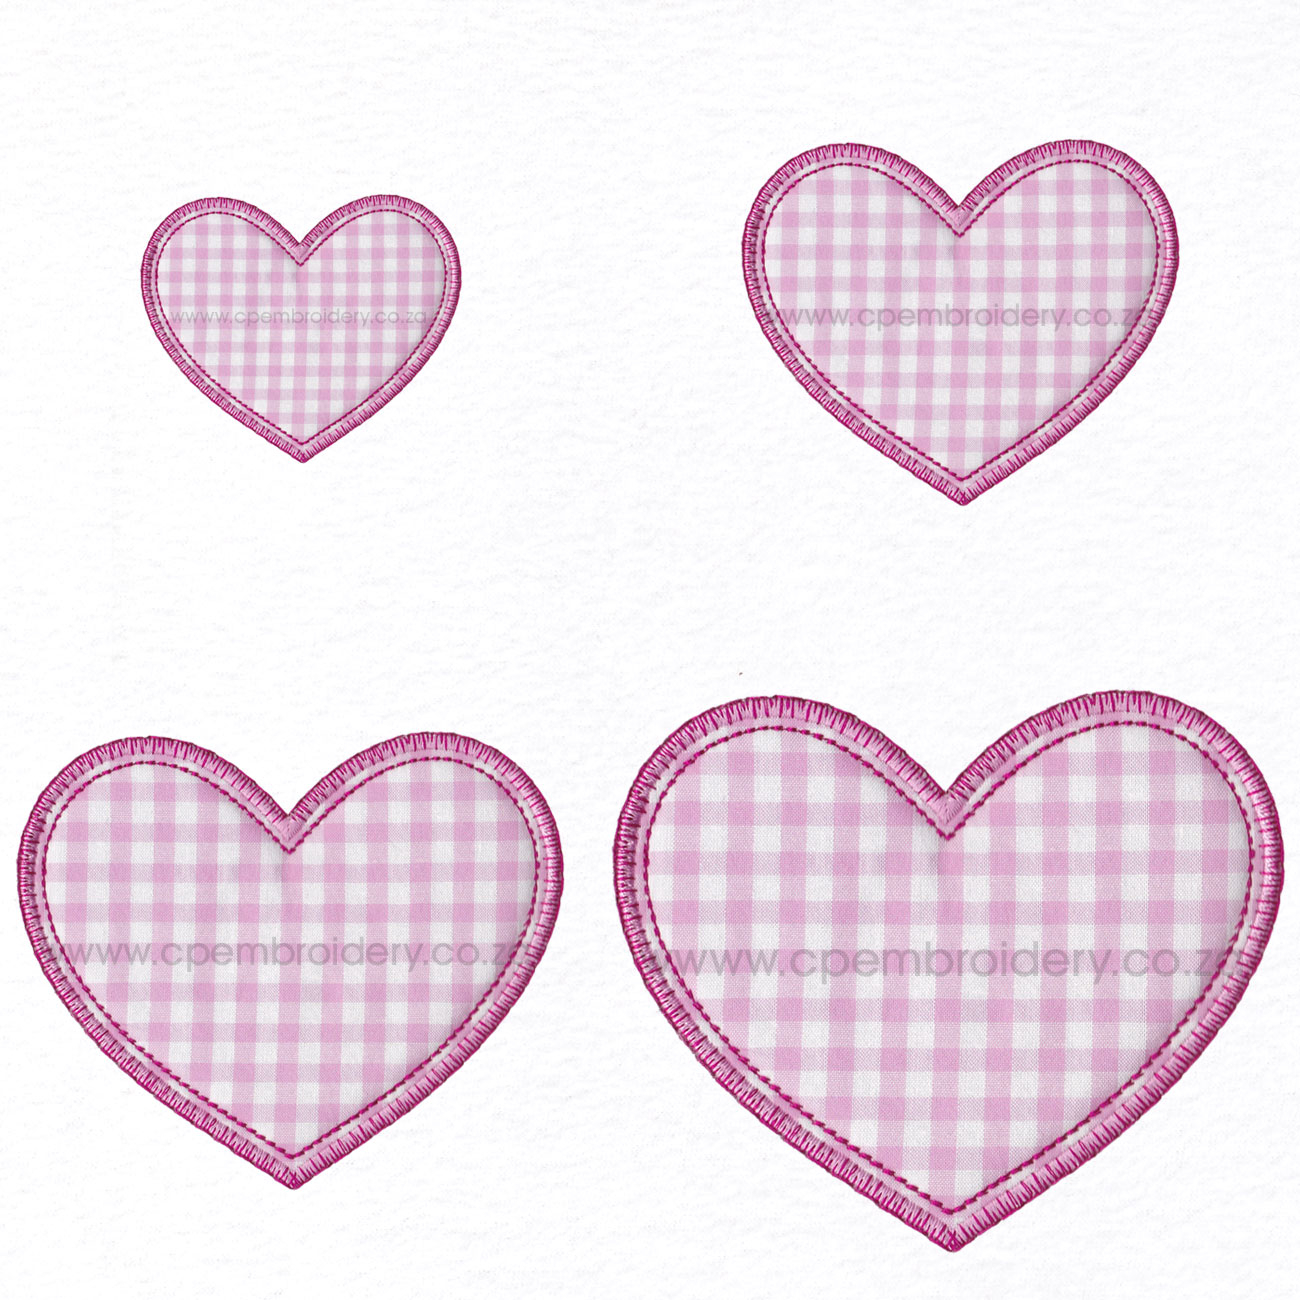 Gingham Embroidery Patterns Free Heart Appliqu Embroidery Design